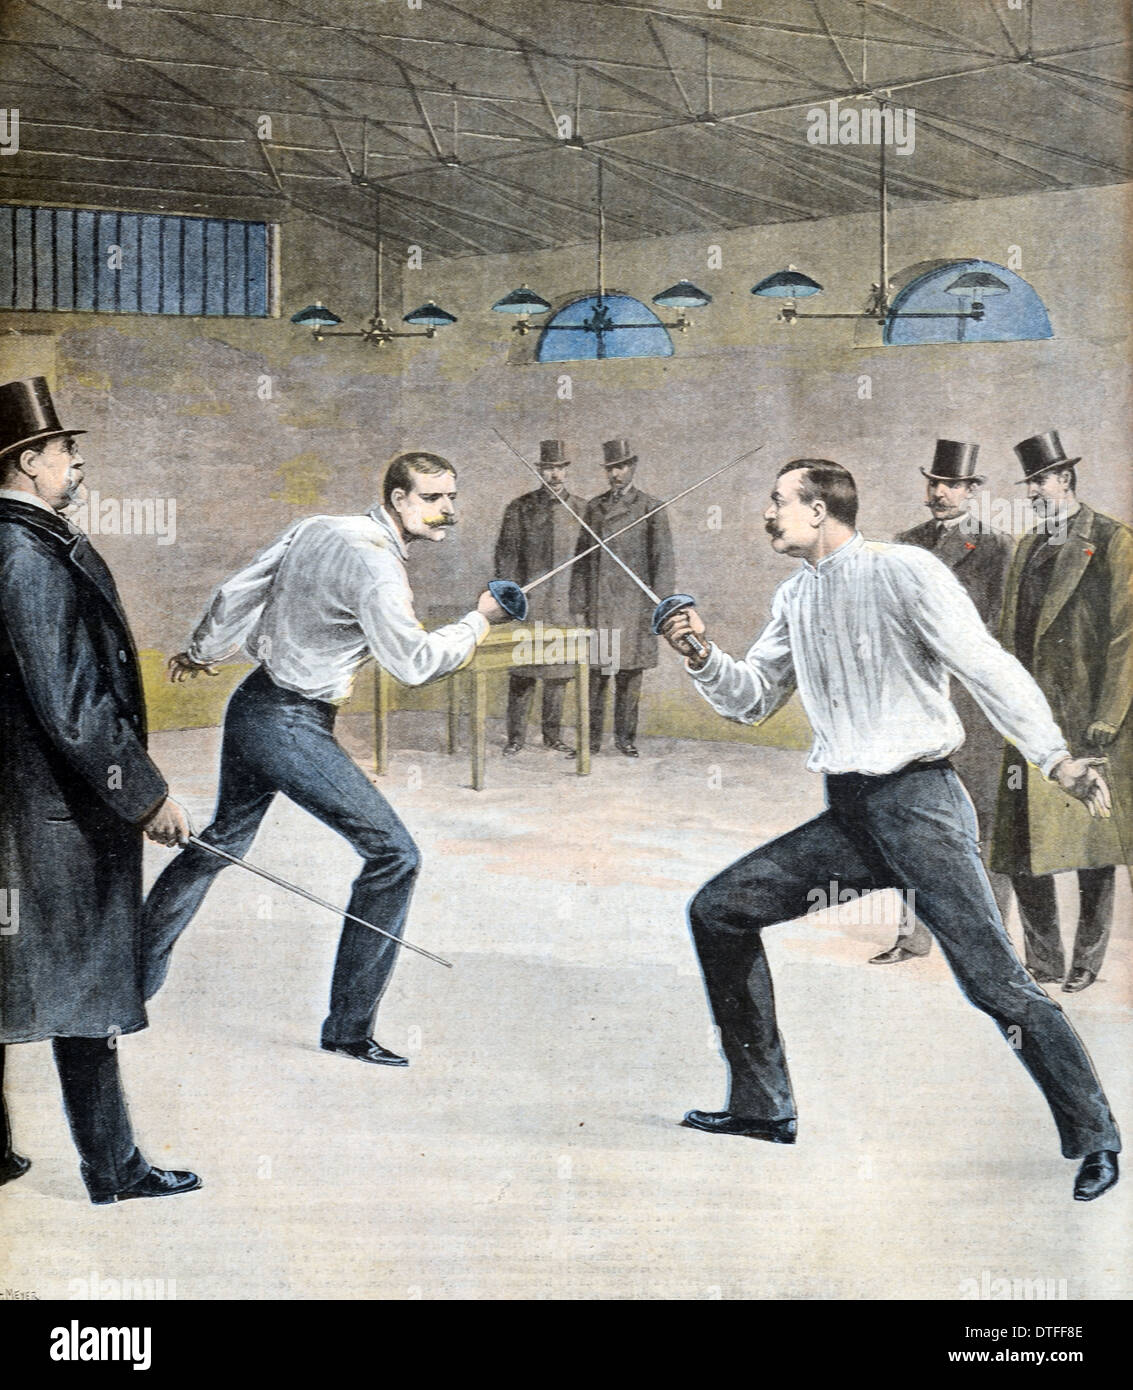 Duel or Fencing between Georges Picquart and Major Hubert-Joseph Henry 1898 over the Alfred Dreyfus Affair Stock Photo